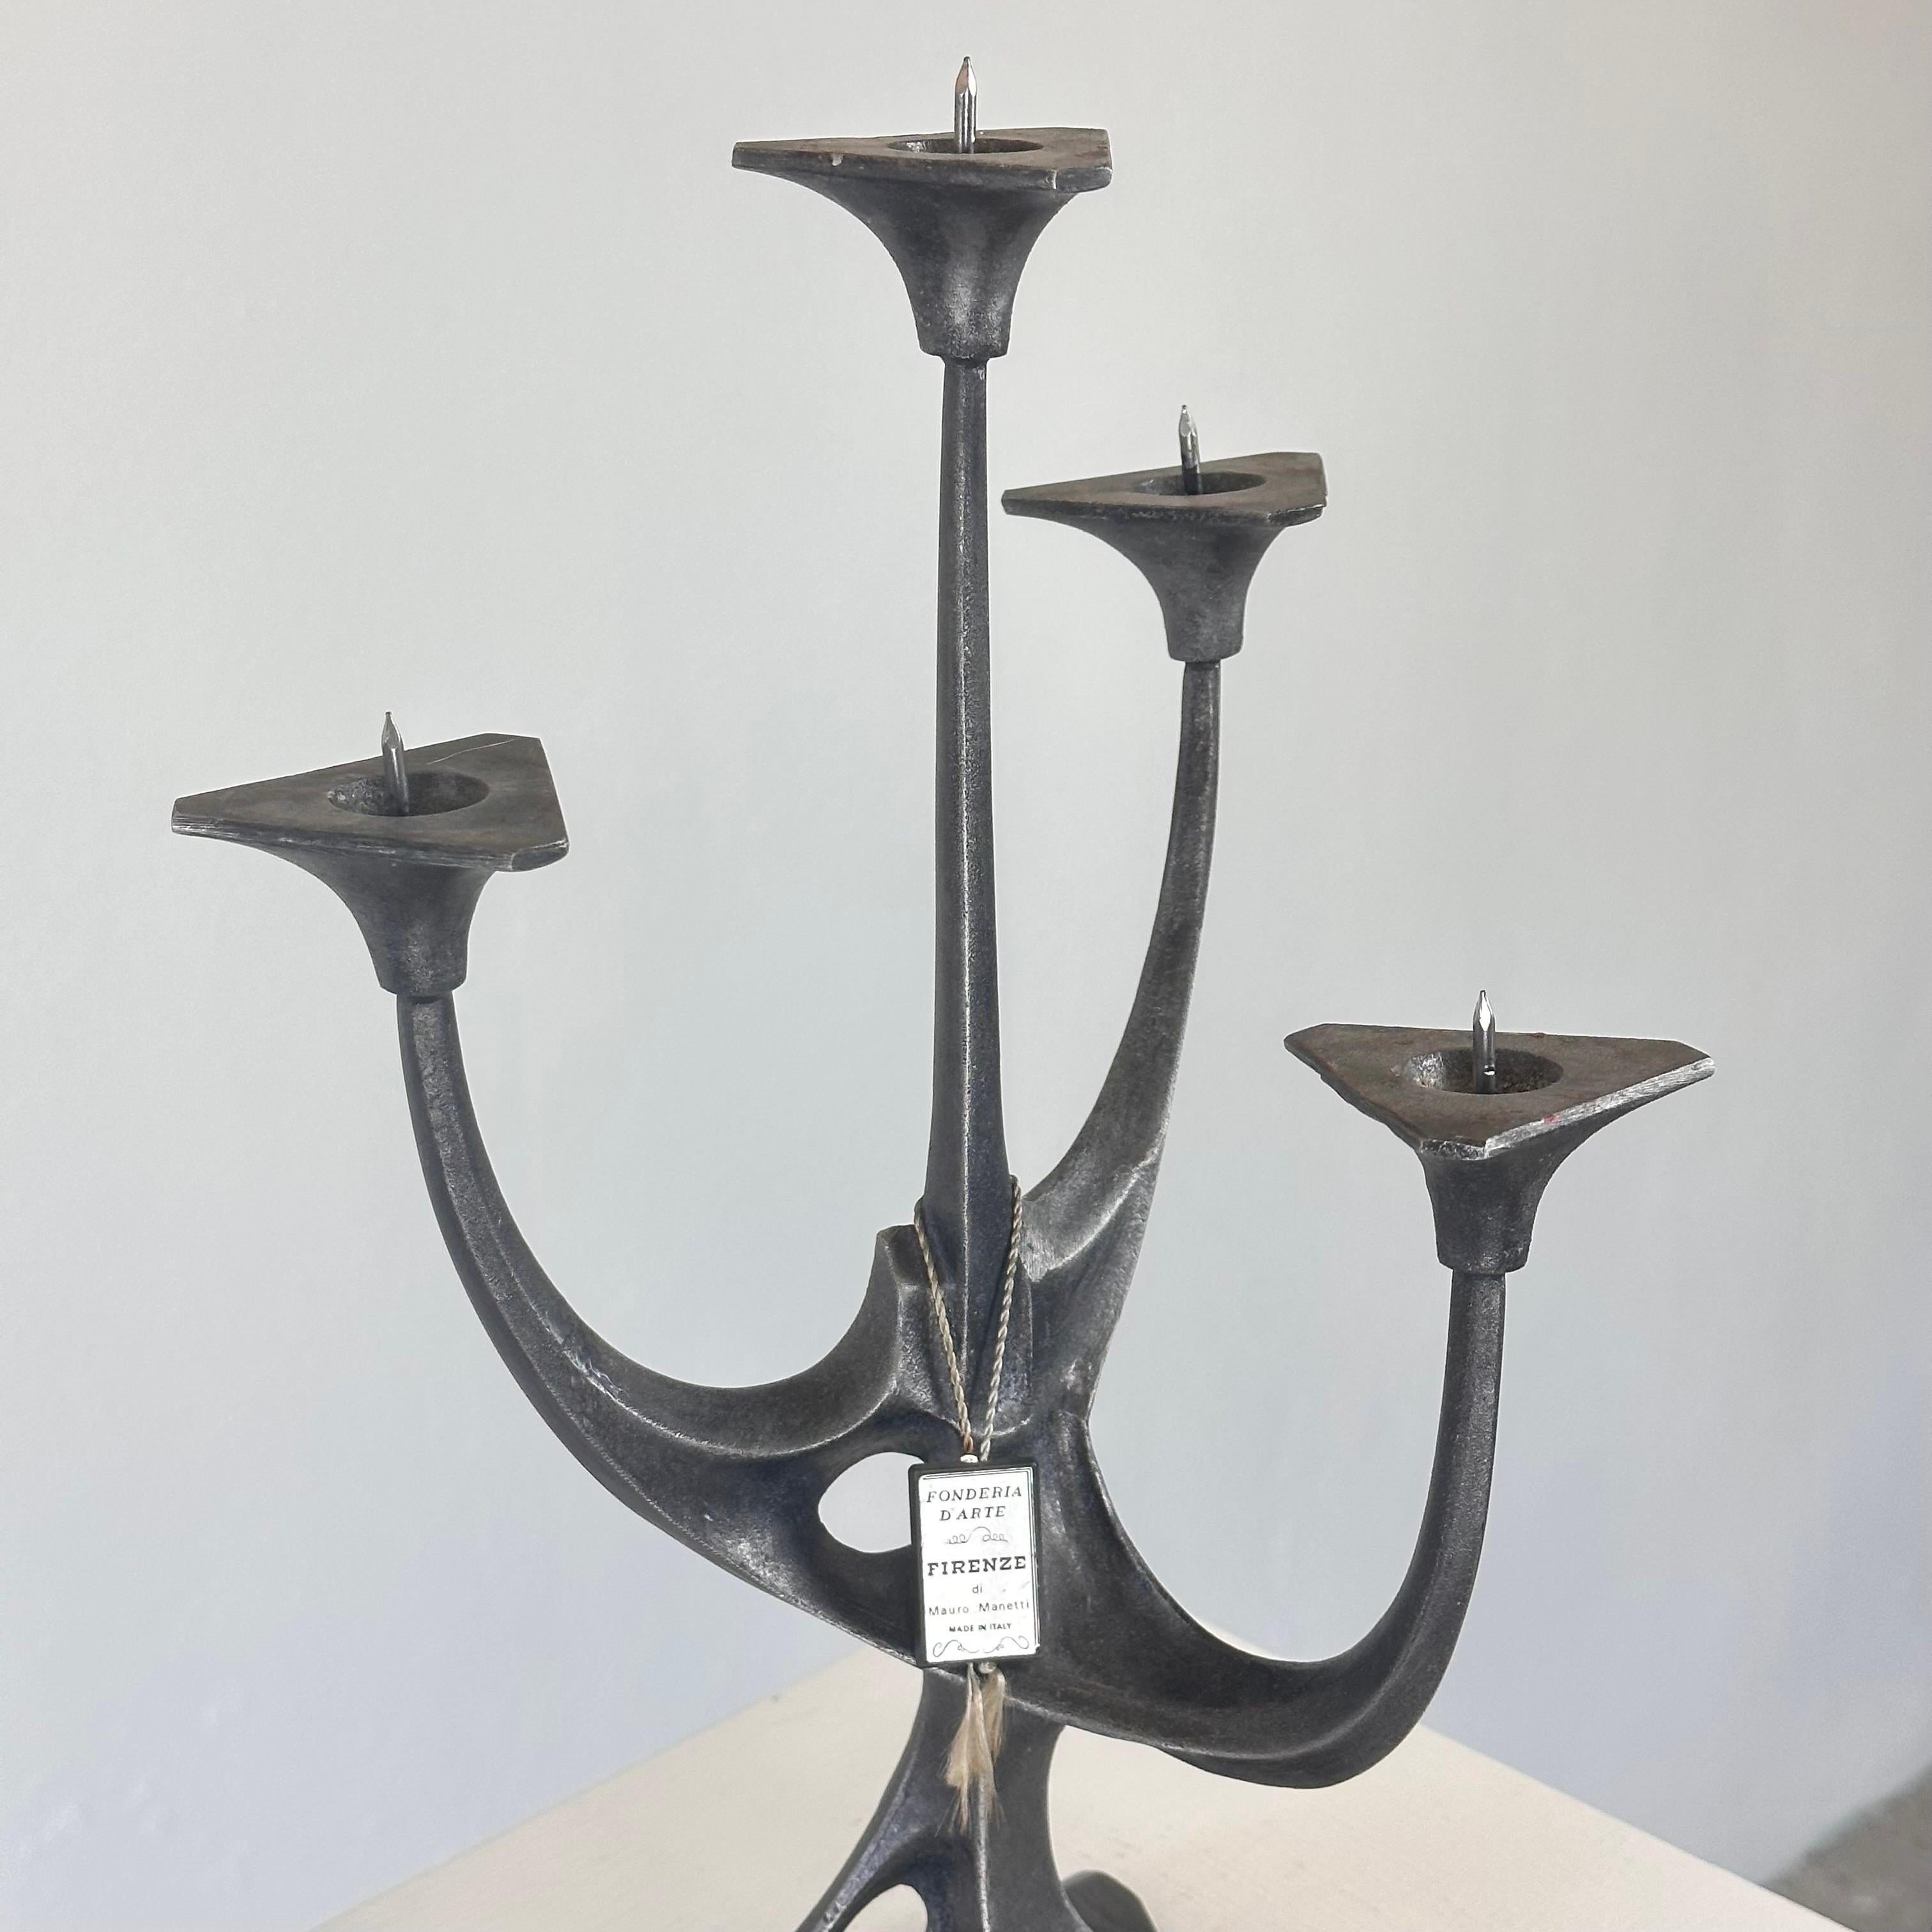 Sculptural Candelabra by Mauro Manetti for Fonderia d'Arte Firenze, 1960s For Sale 2